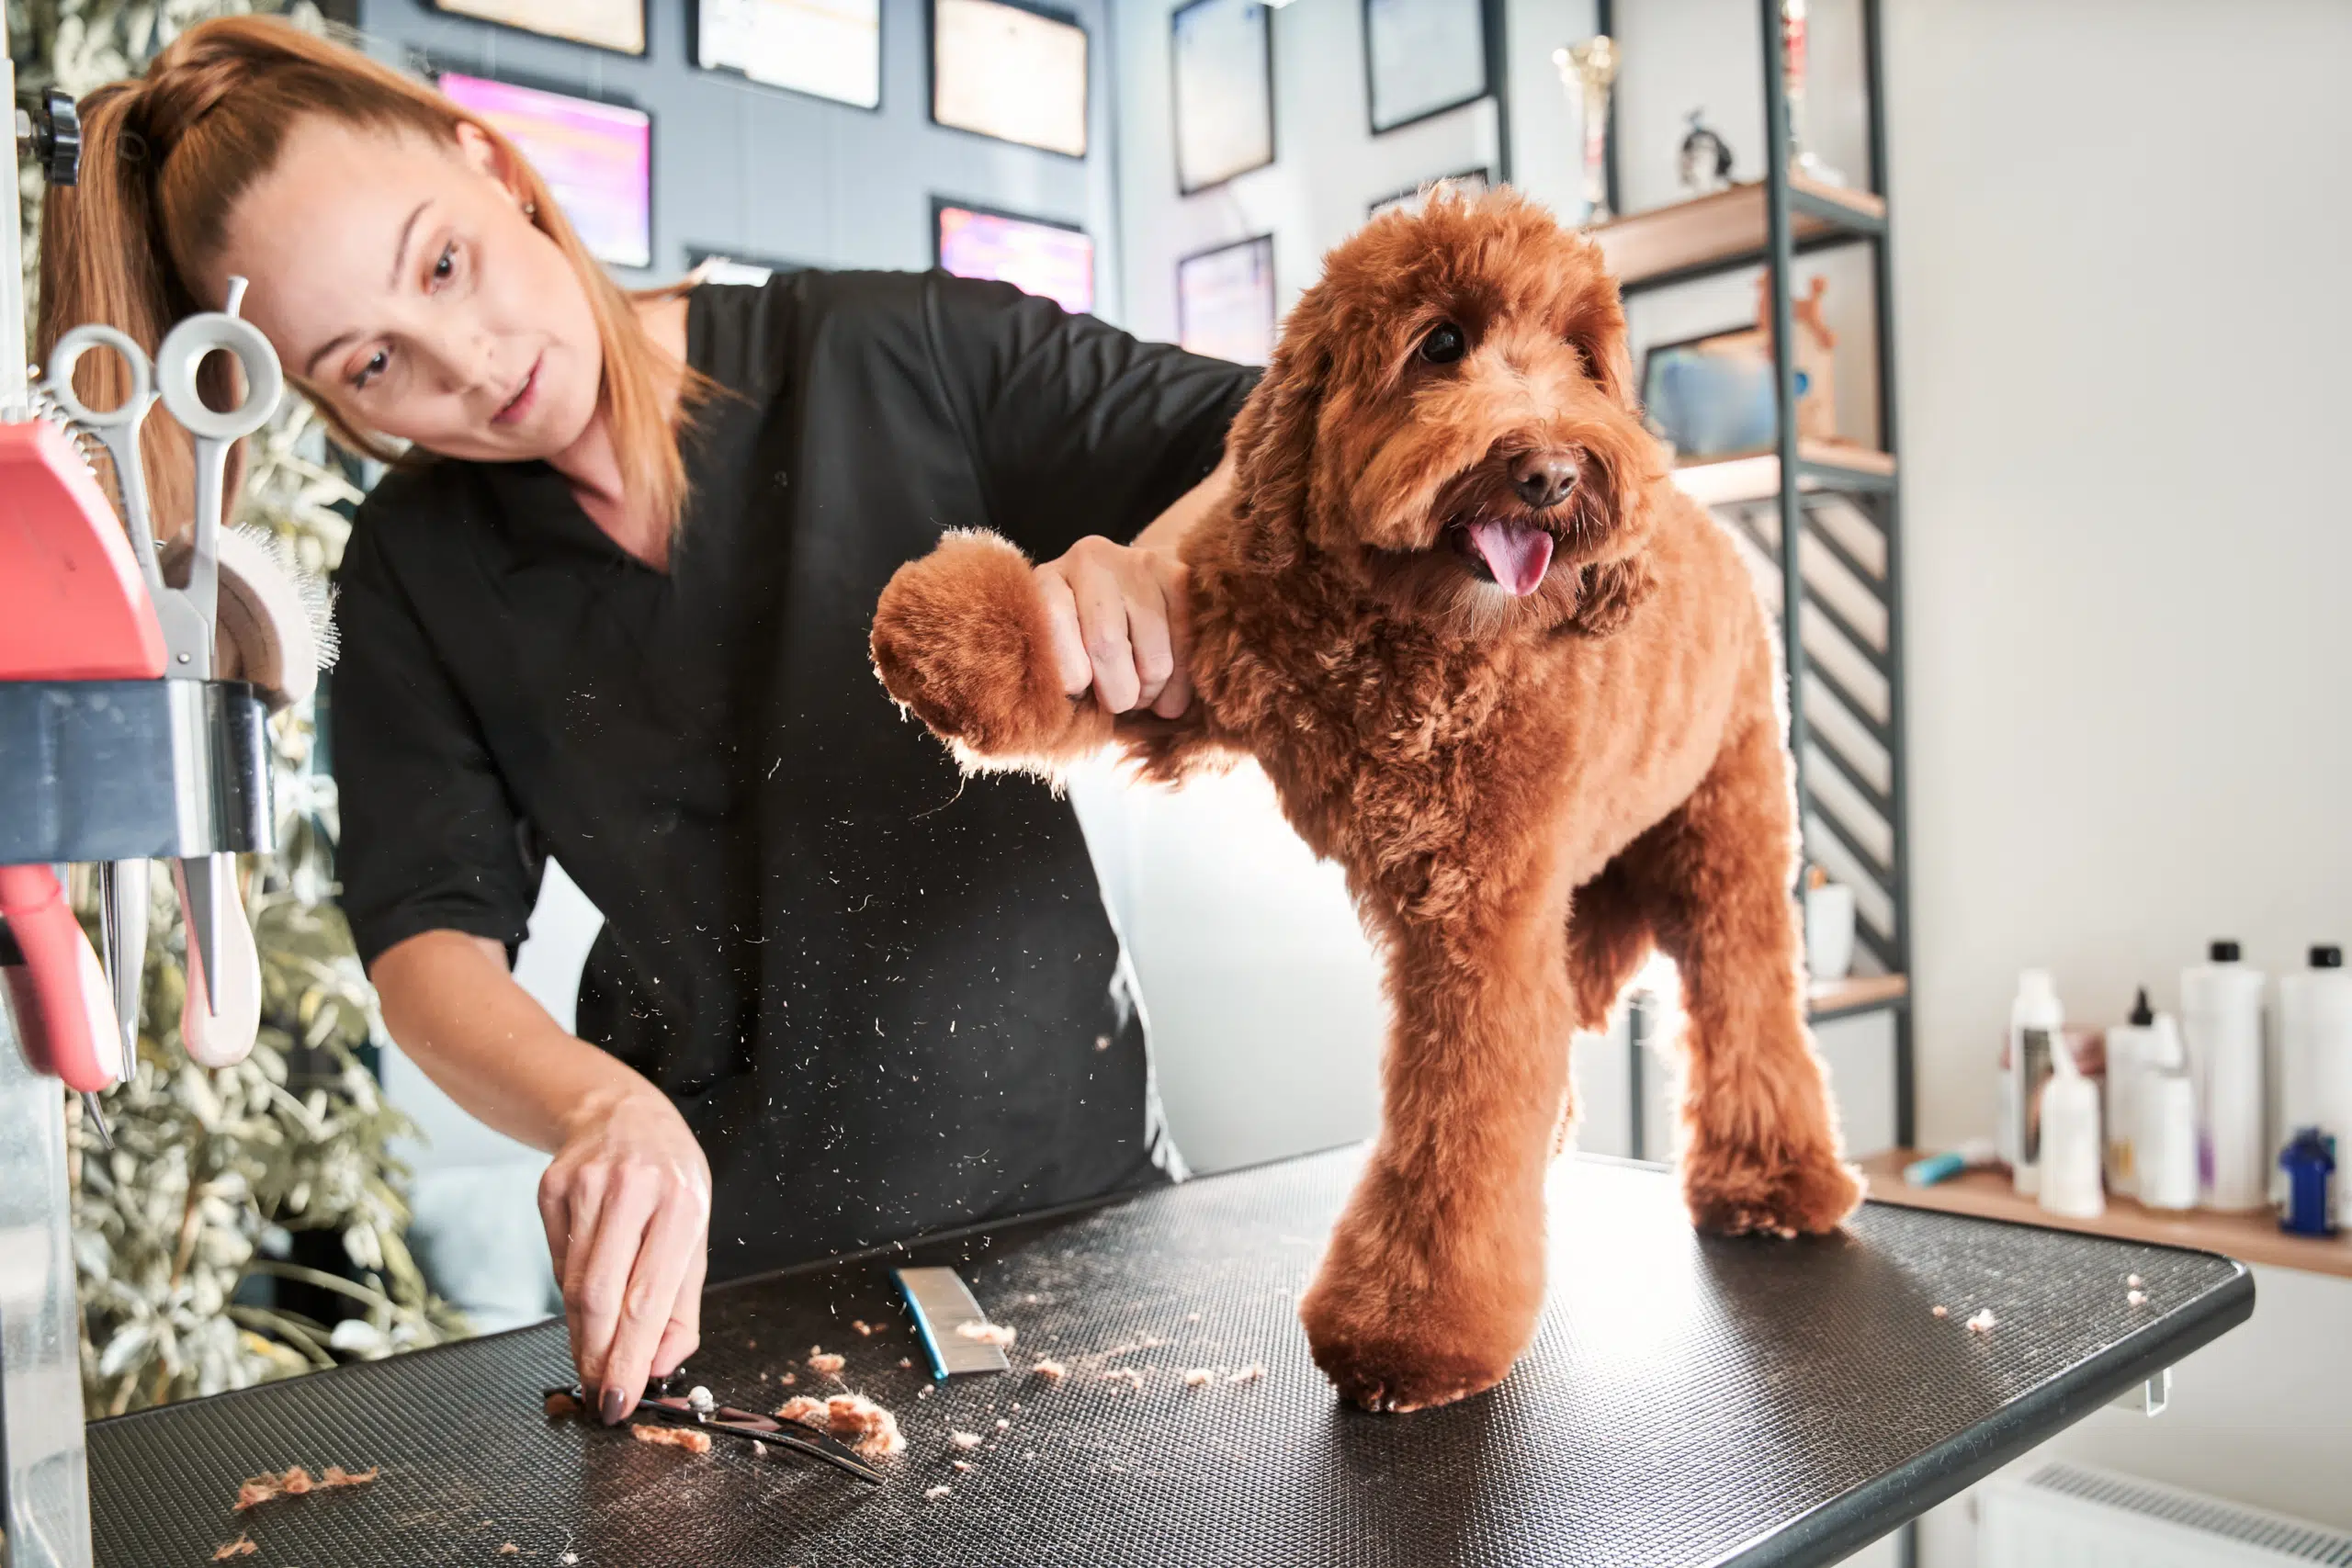 A professional groomer with certifications and training